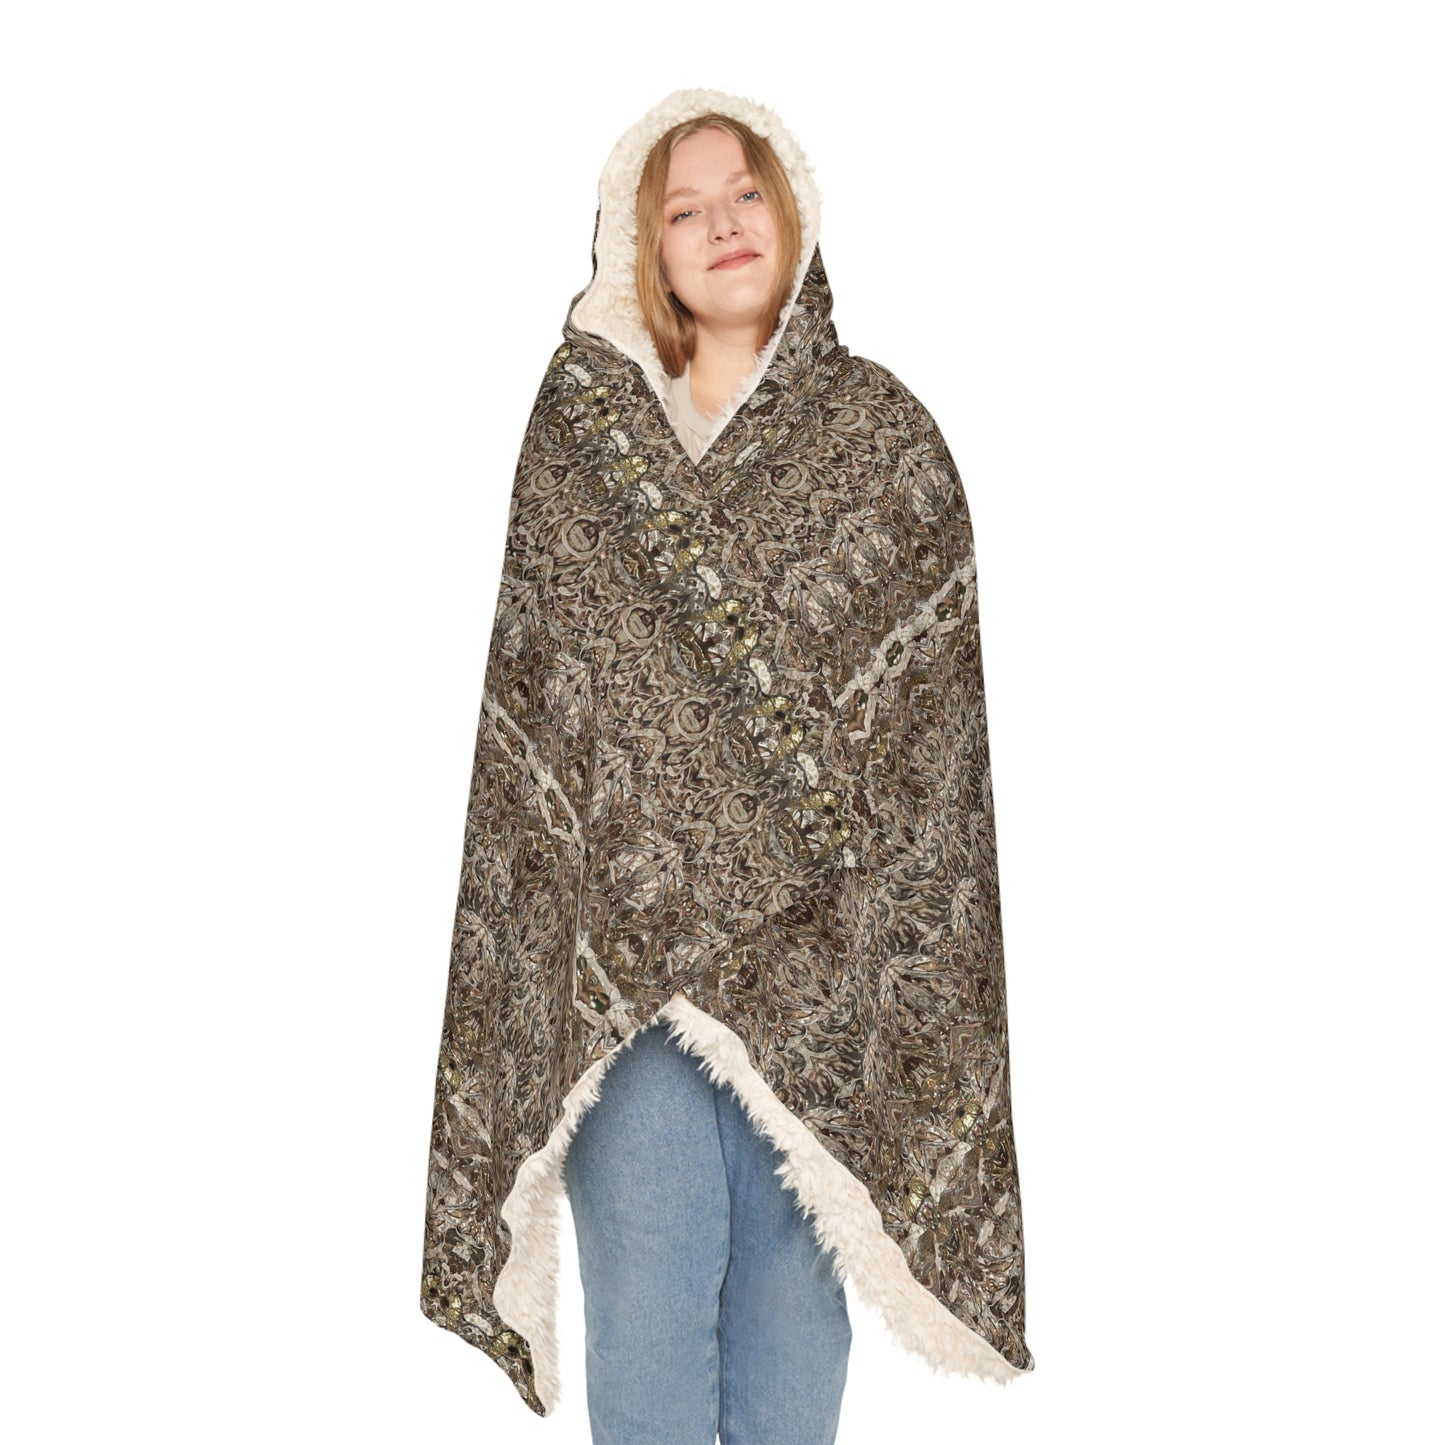 Hooded Snuggle Blanket (Samhain Dream Thaw 2/15 (Duo ex quindecim) RJSTHw2023 RJS